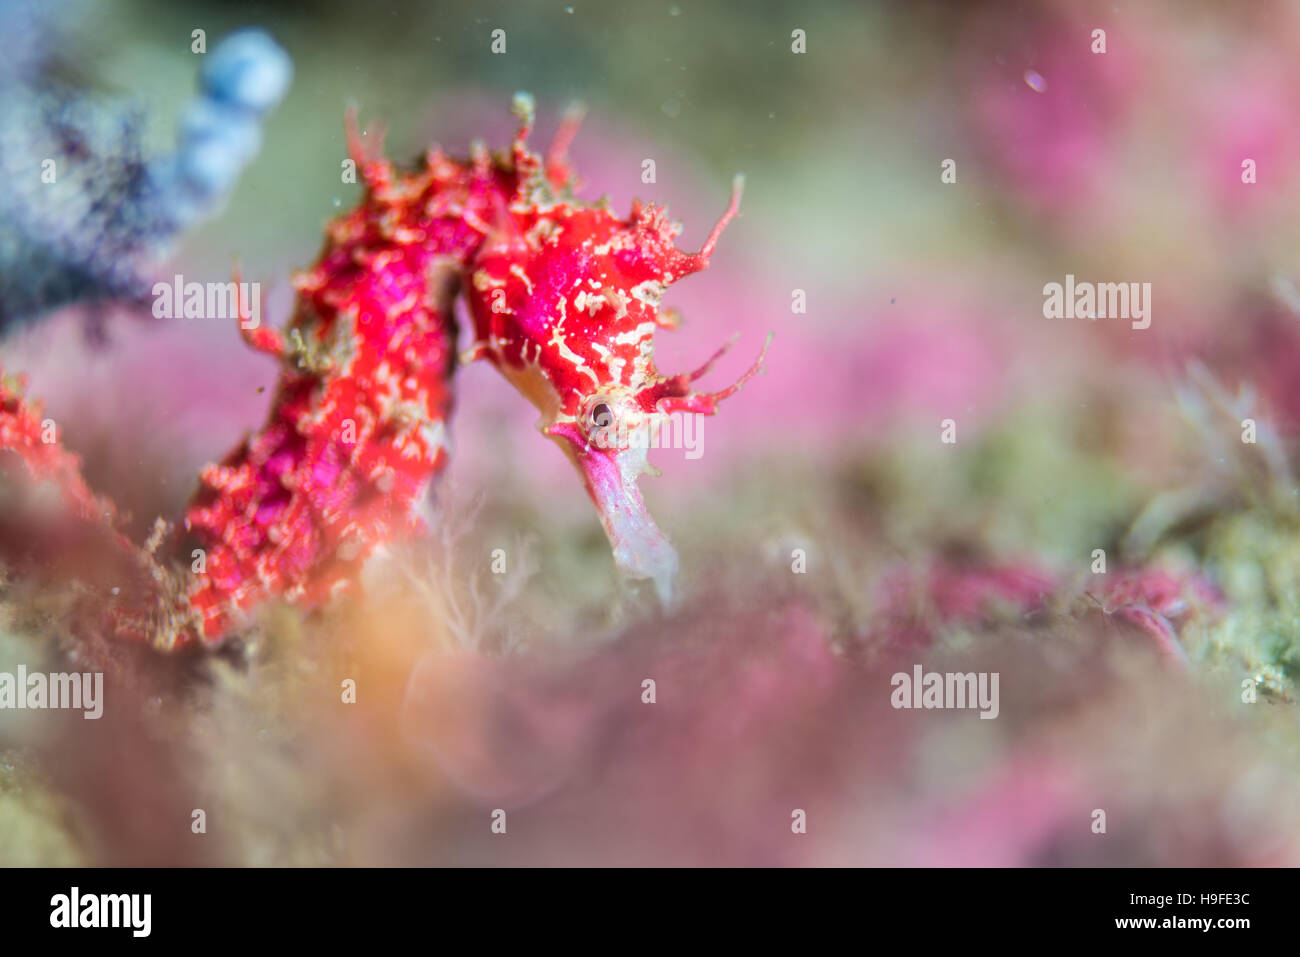 Shiho's seahorse, Hippocampus sindonis  Jordan & Snyder, 190, at artificial fish reef.  Owase, Mie, Japan. Depth 18m. Stock Photo